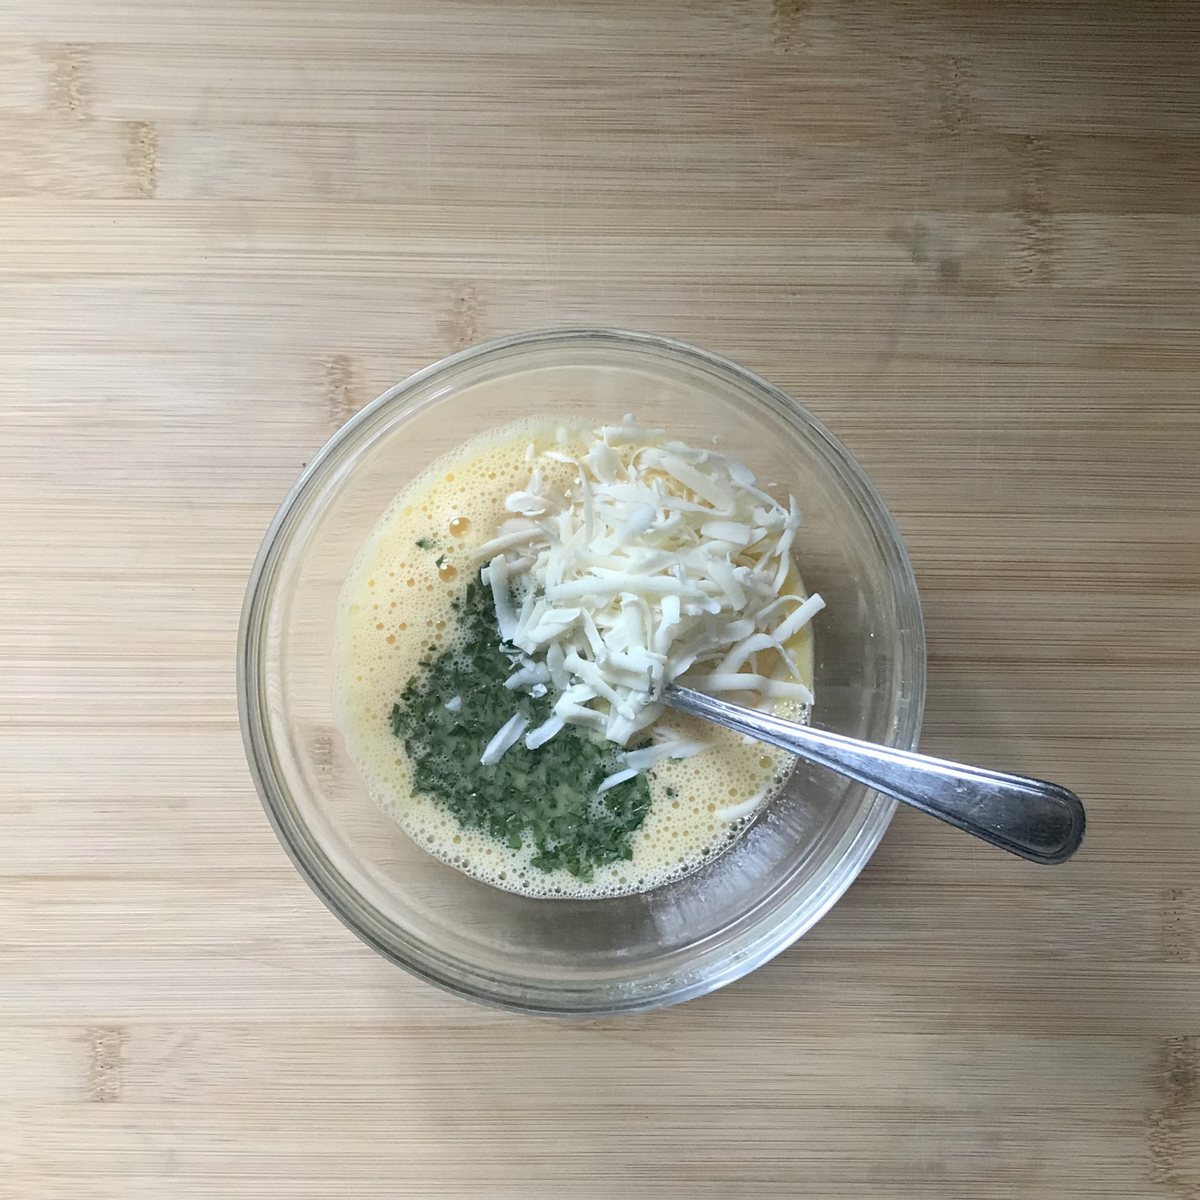 Eggs, cheese and parsley being combined in a bowl.